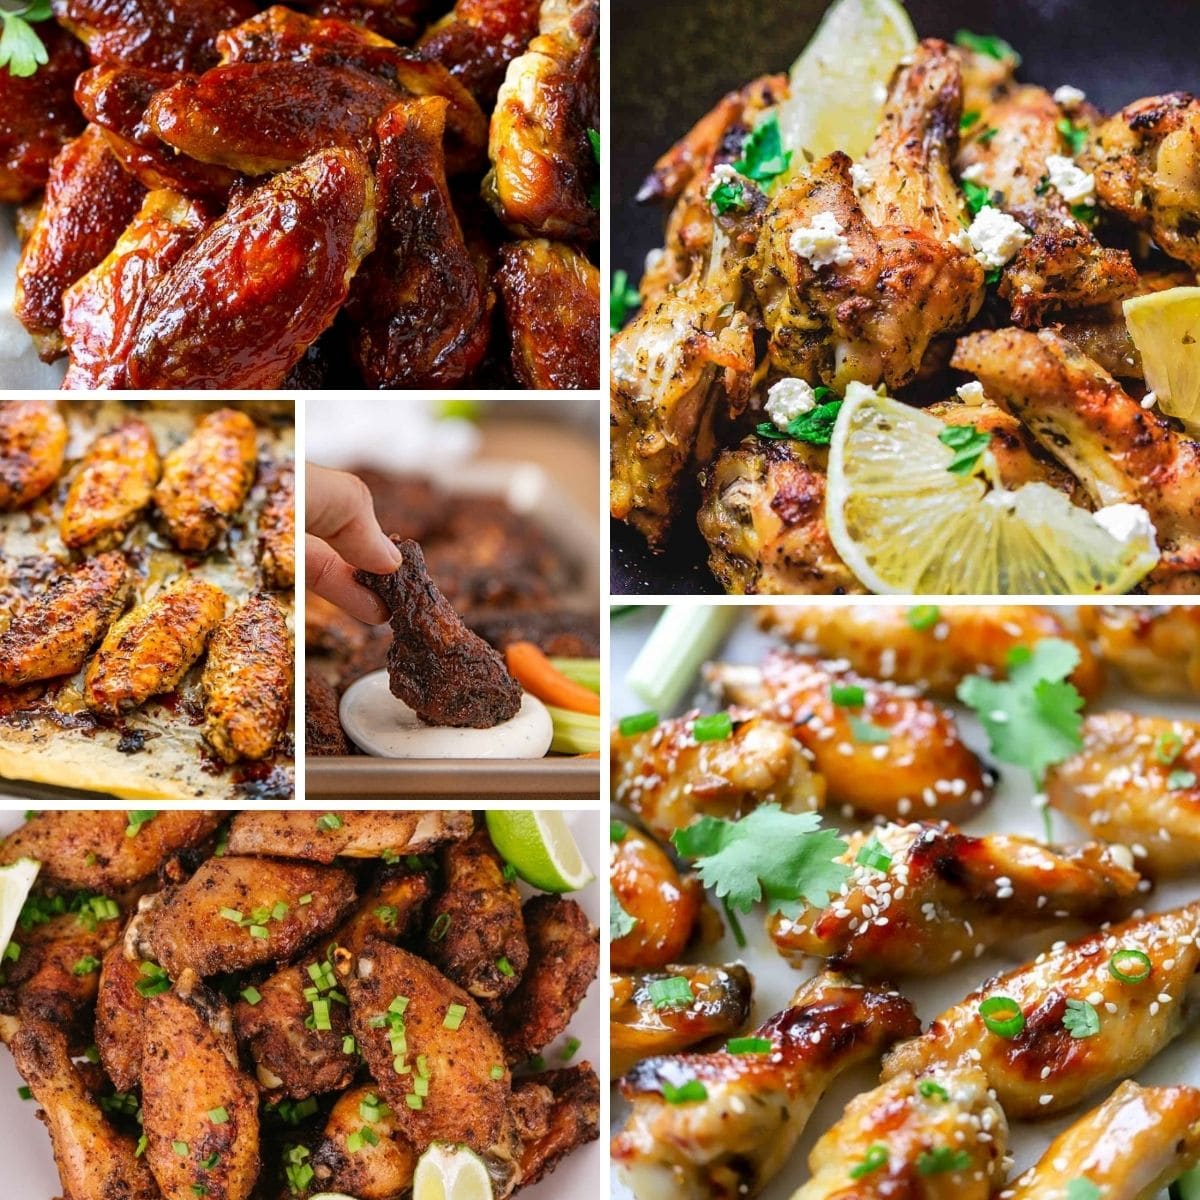 ketcher at føre Lappe 25 Best Chicken Wing Recipes Anyone Can Make